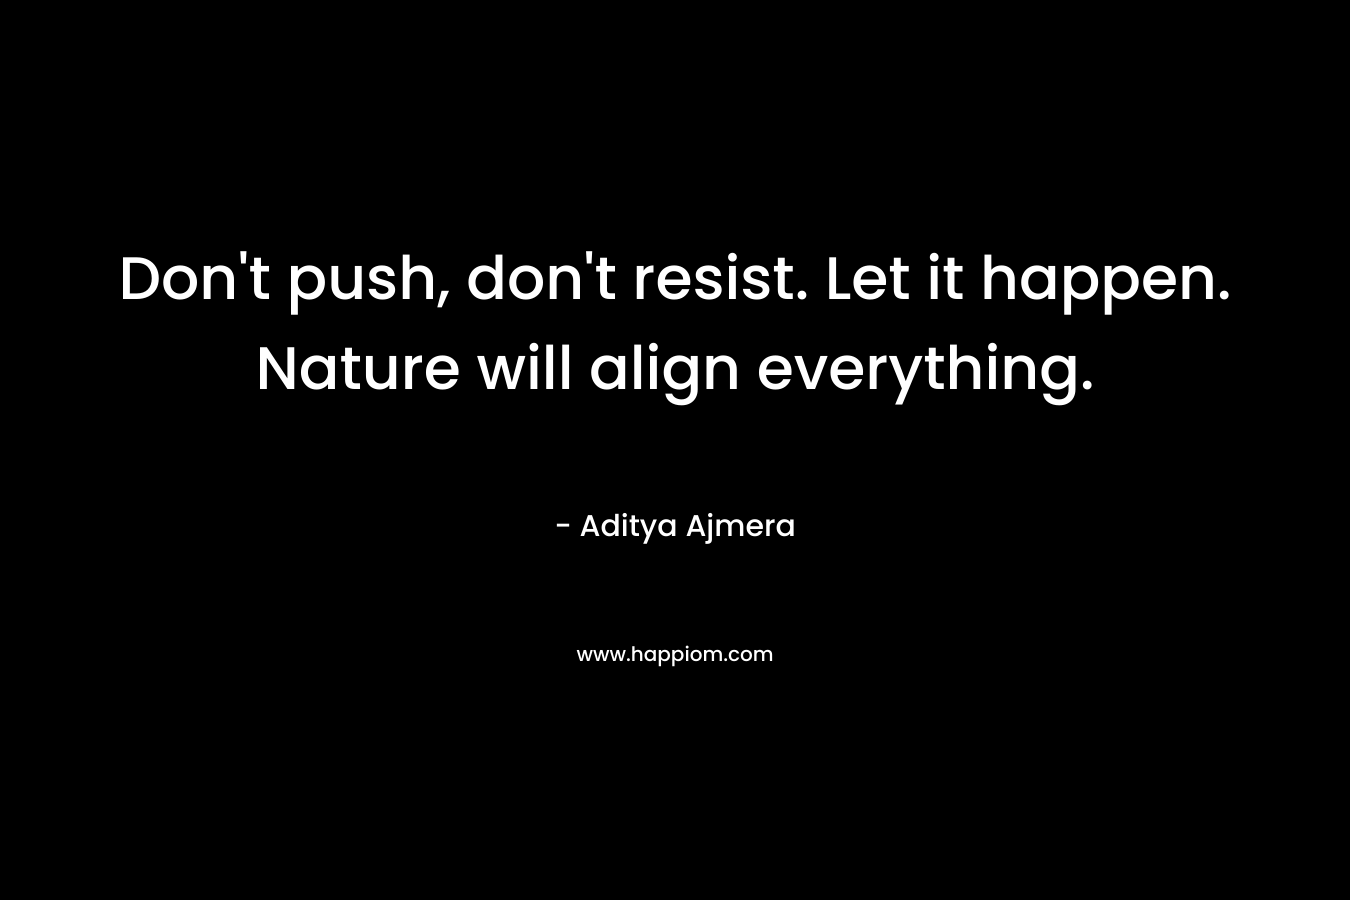 Don’t push, don’t resist. Let it happen. Nature will align everything. – Aditya Ajmera